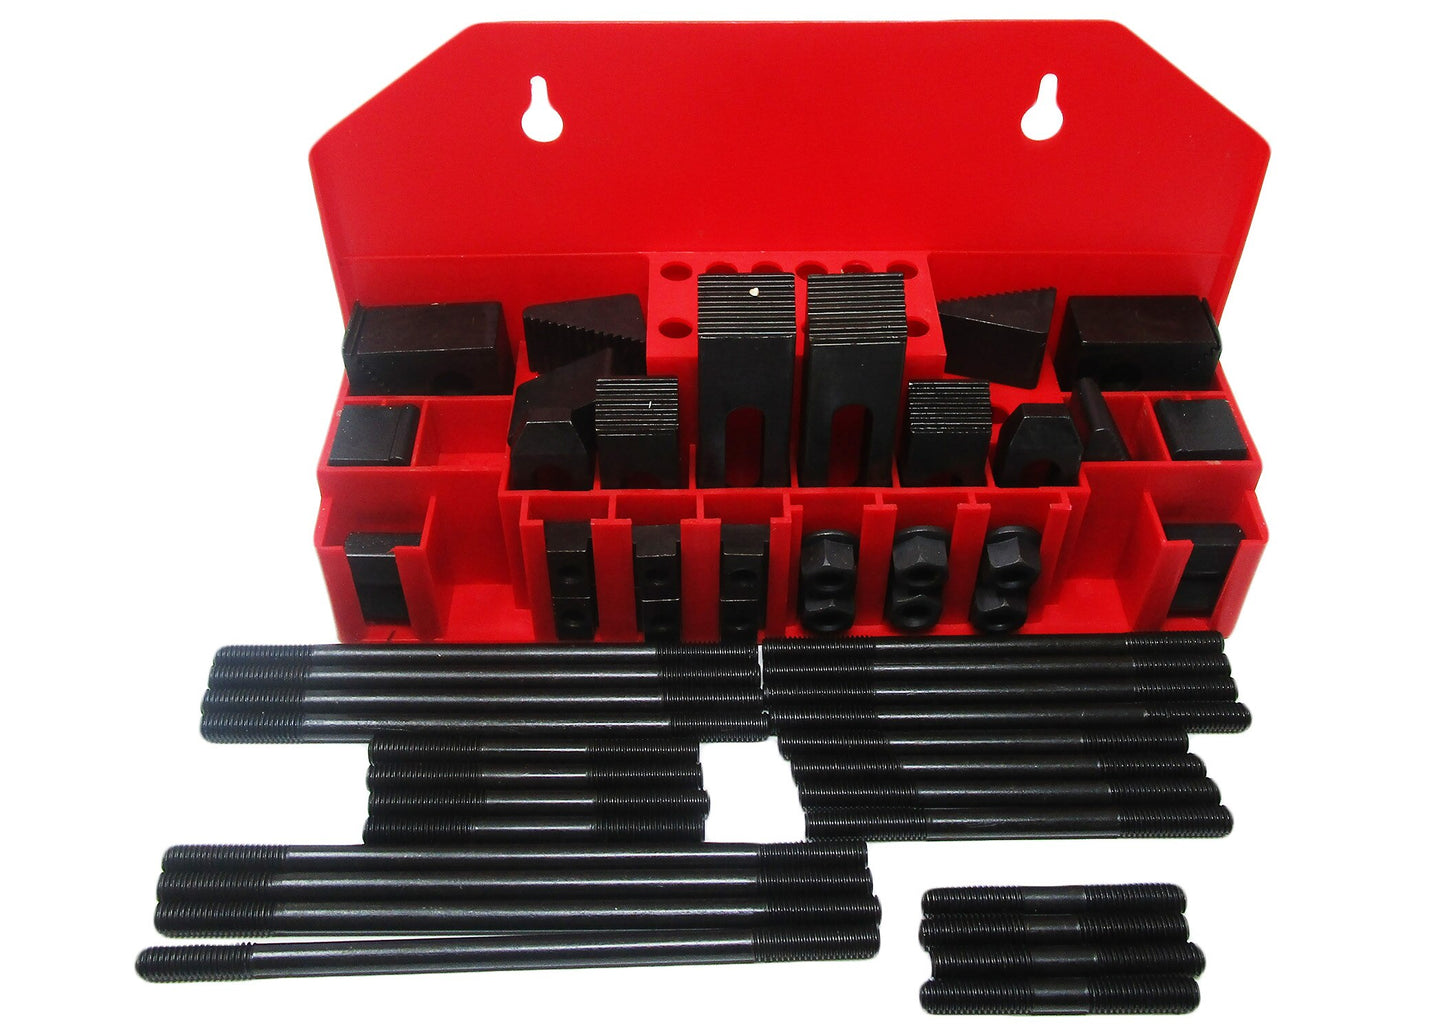 CK-38, 52-Piece Clamping Kit with Tray for 3/8" T-Slot